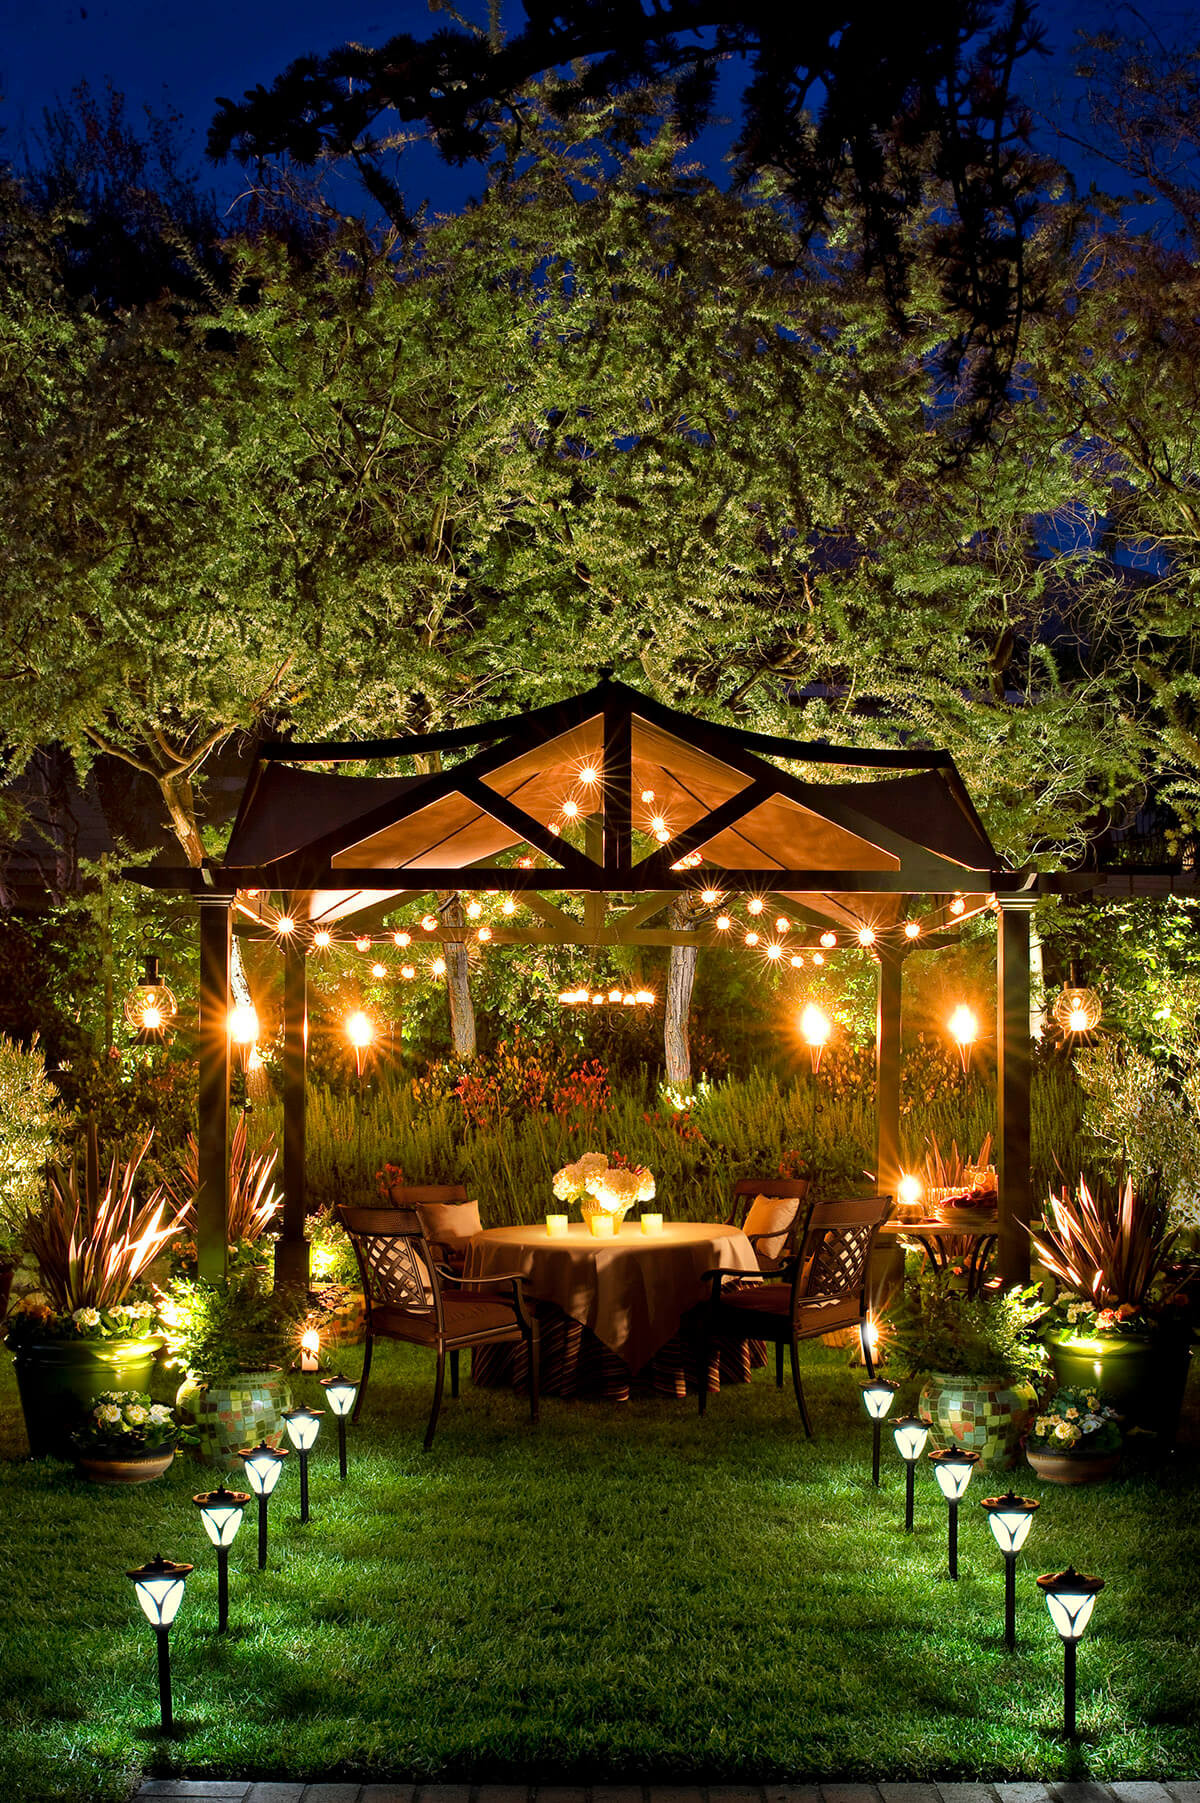 Lighting Ideas For Backyard Party
 27 Best Backyard Lighting Ideas and Designs for 2017